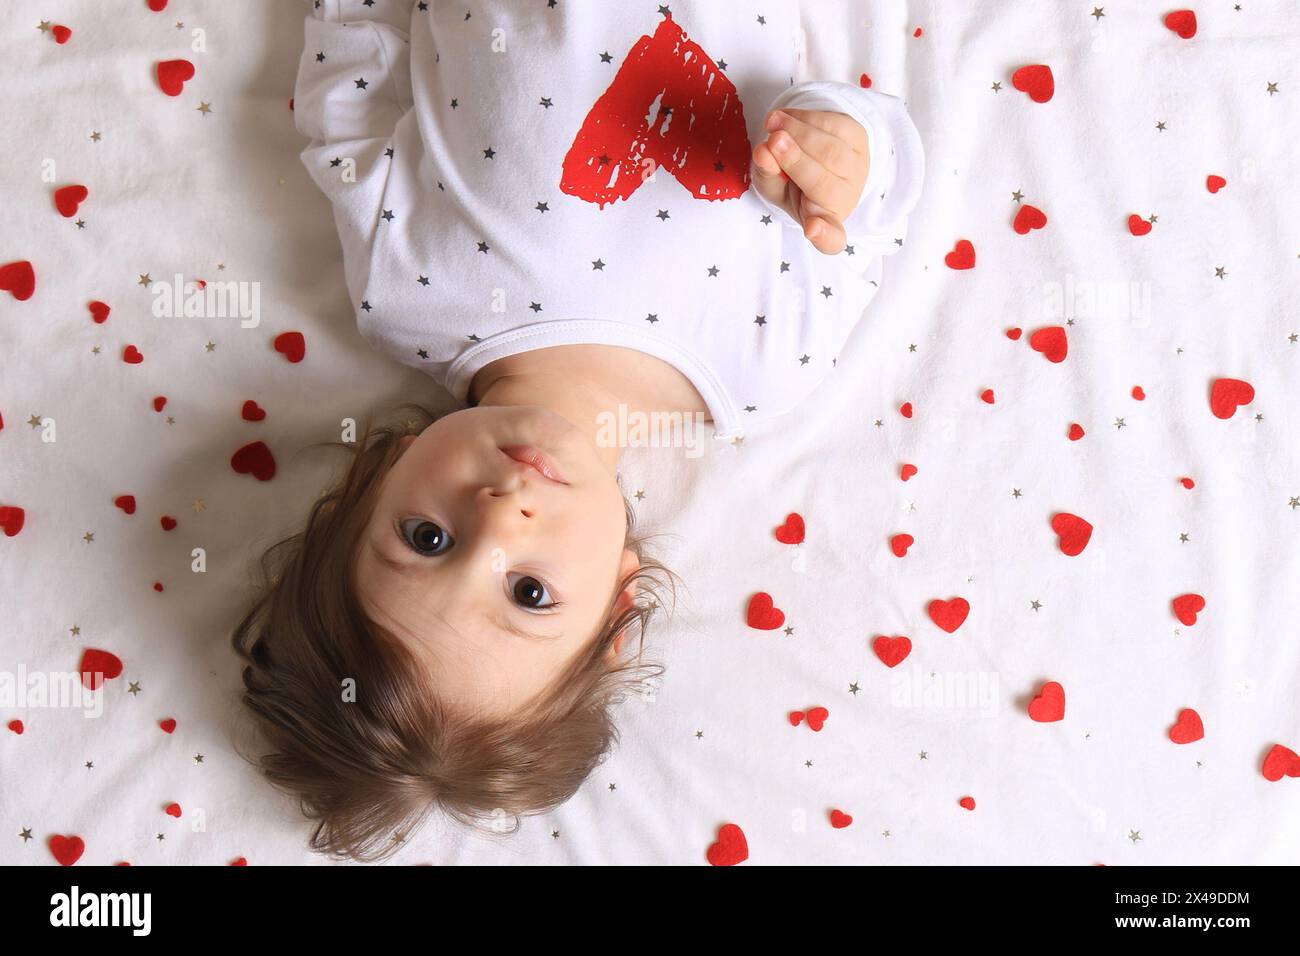 A baby with lots of red hearts surrounding him on white. Stock Photo